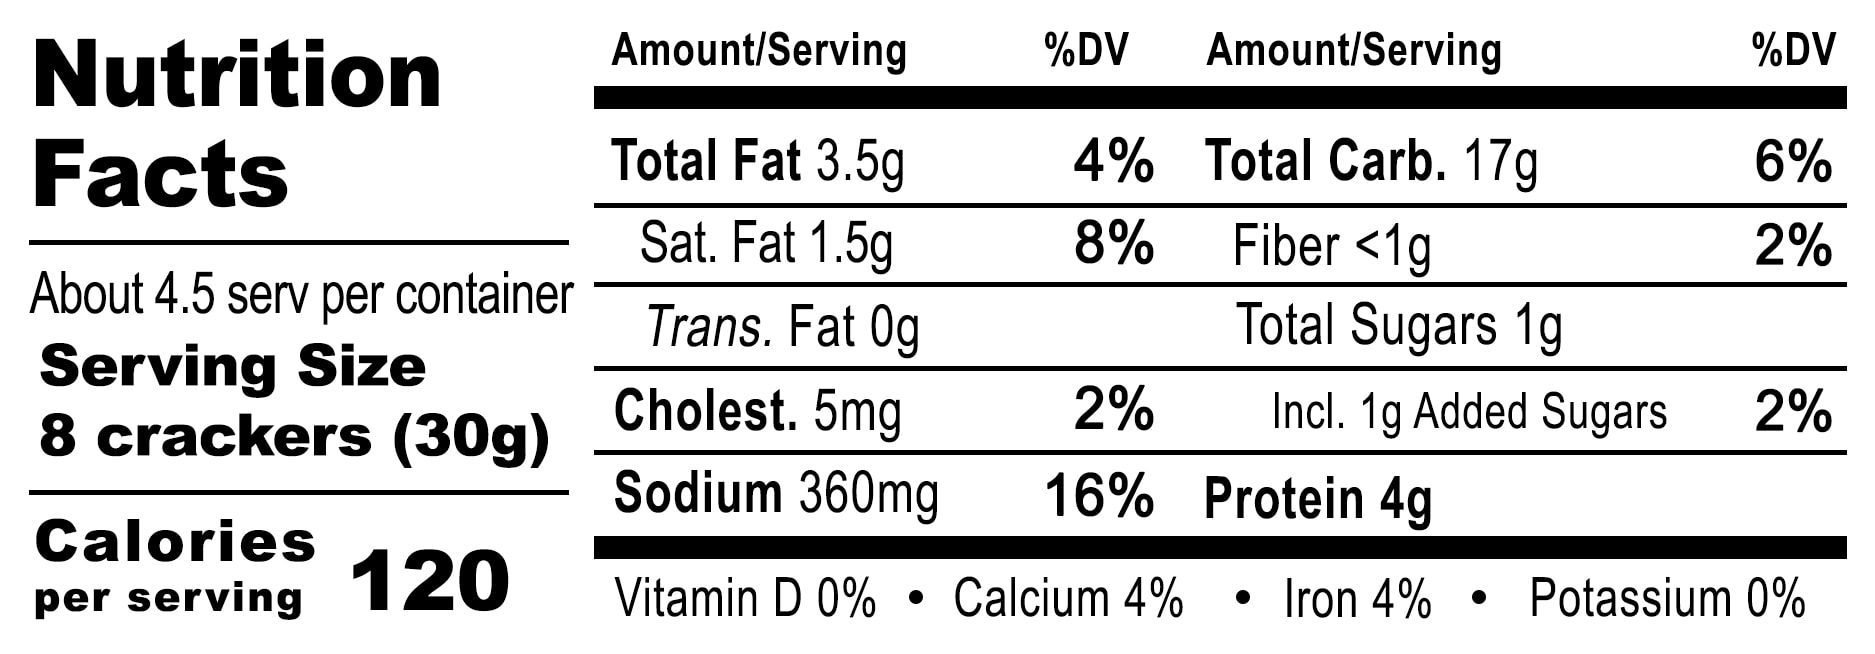 Flagship Cracker Nutrition Facts image